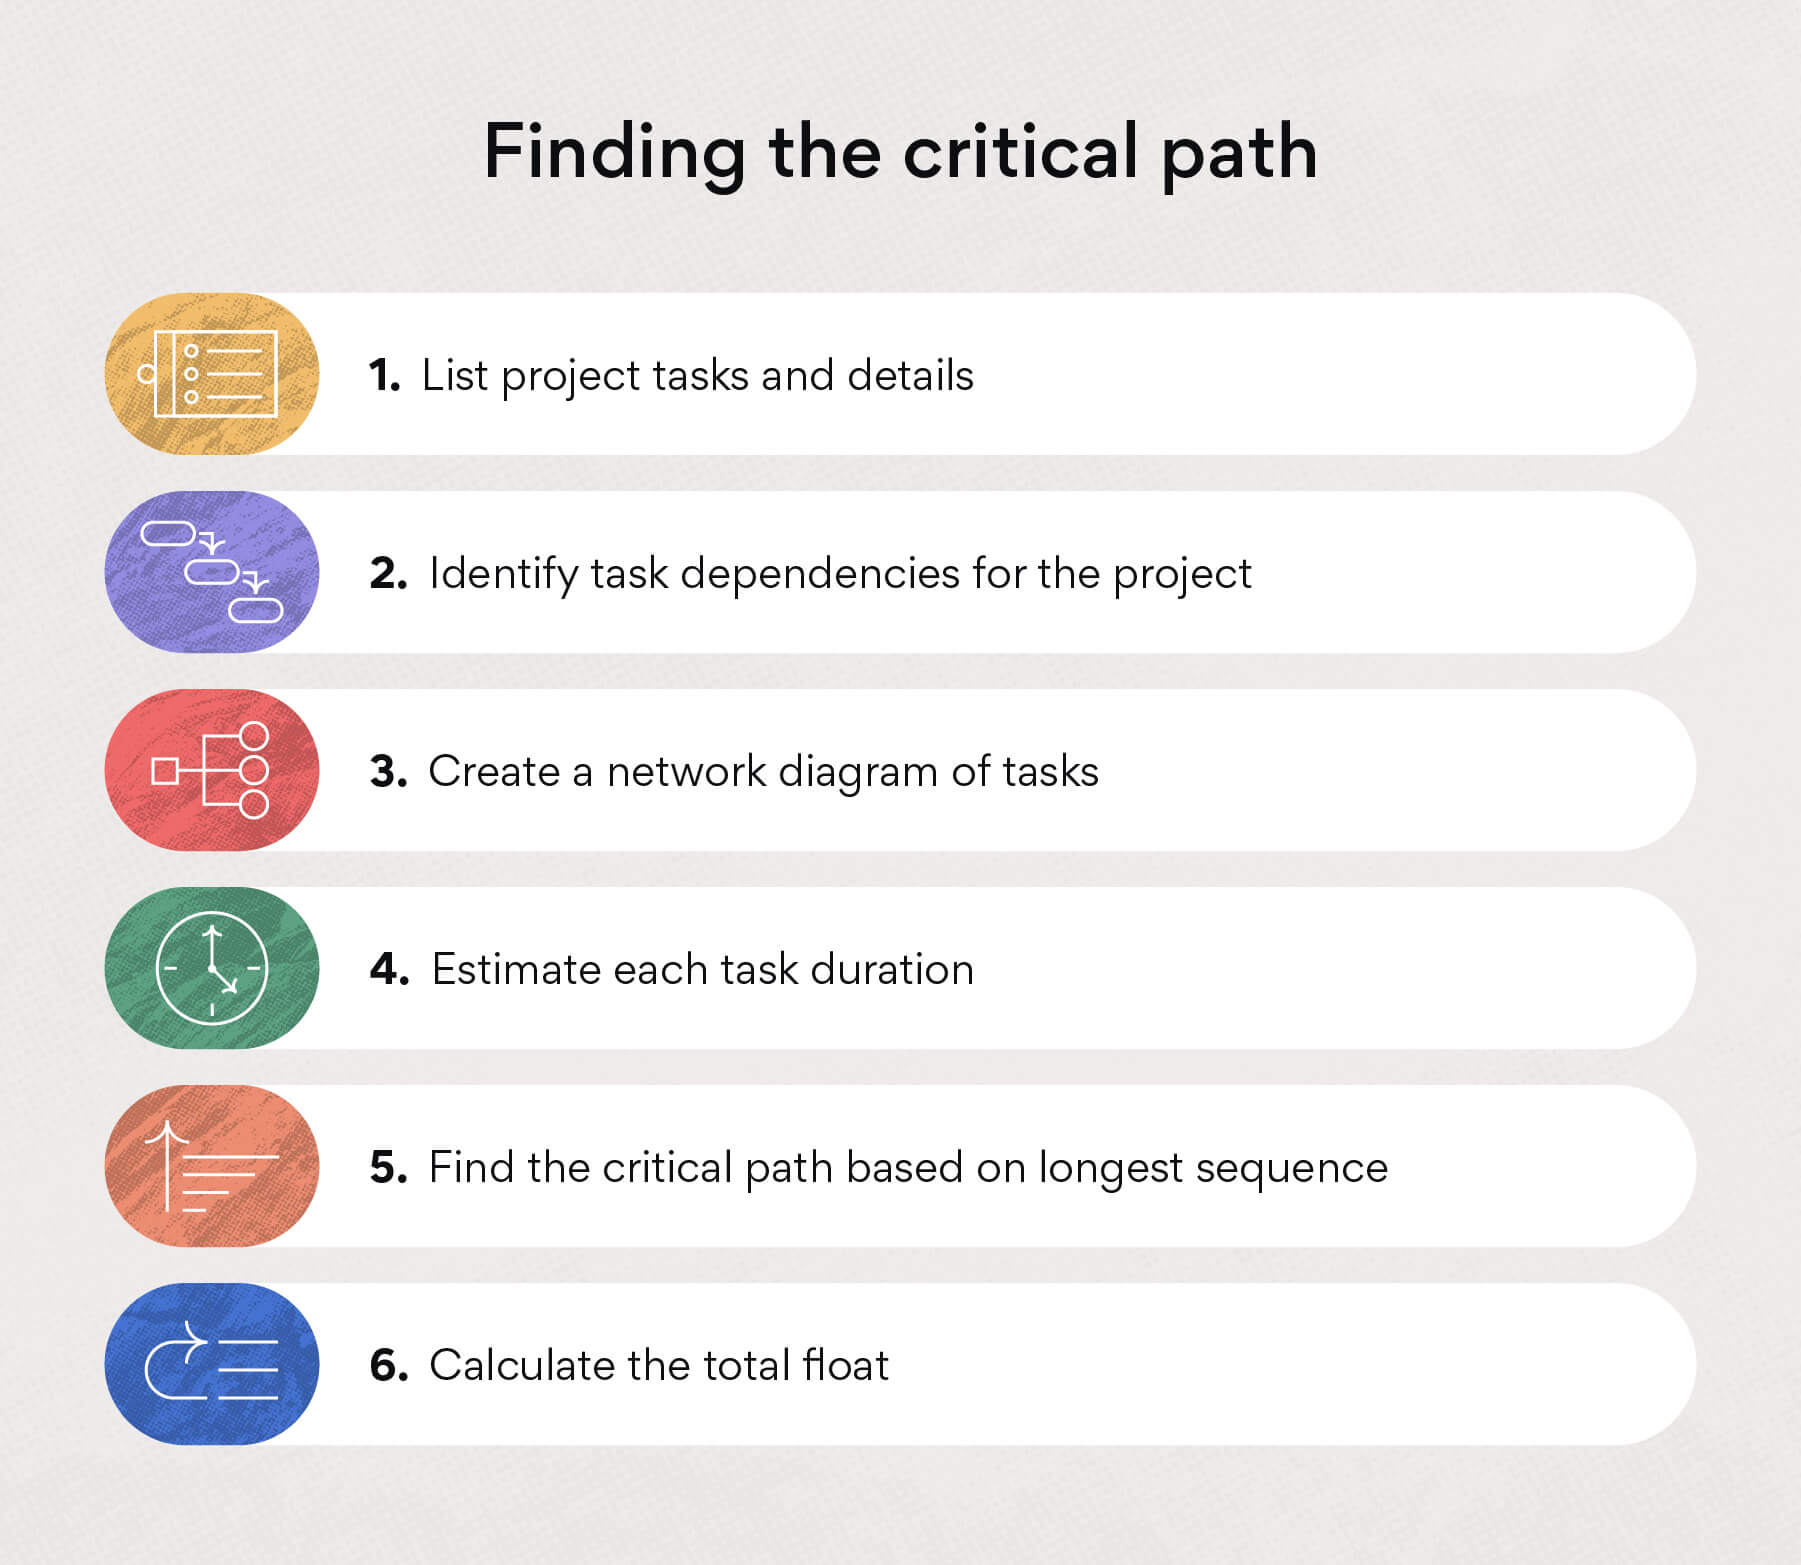 Finding the critical path